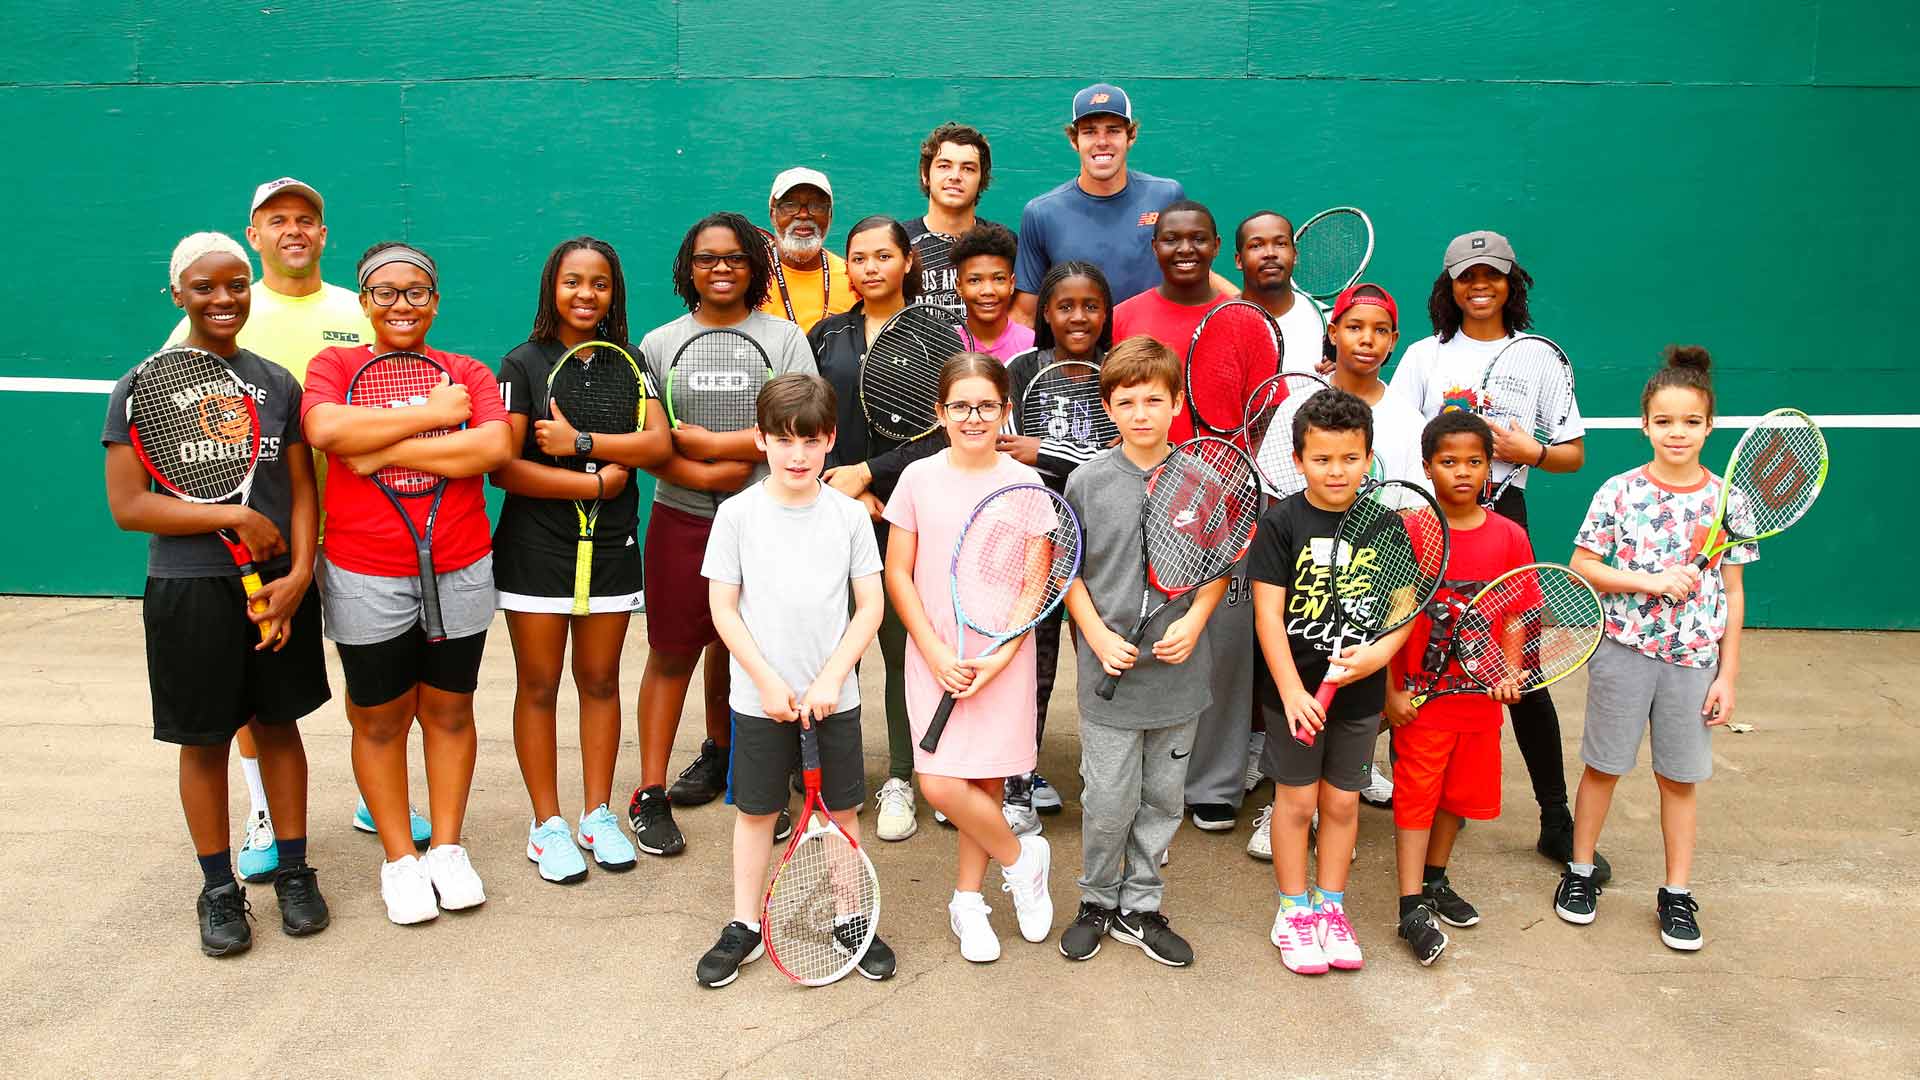 Taylor Fritz and Reilly Opelka helping the community in Houston